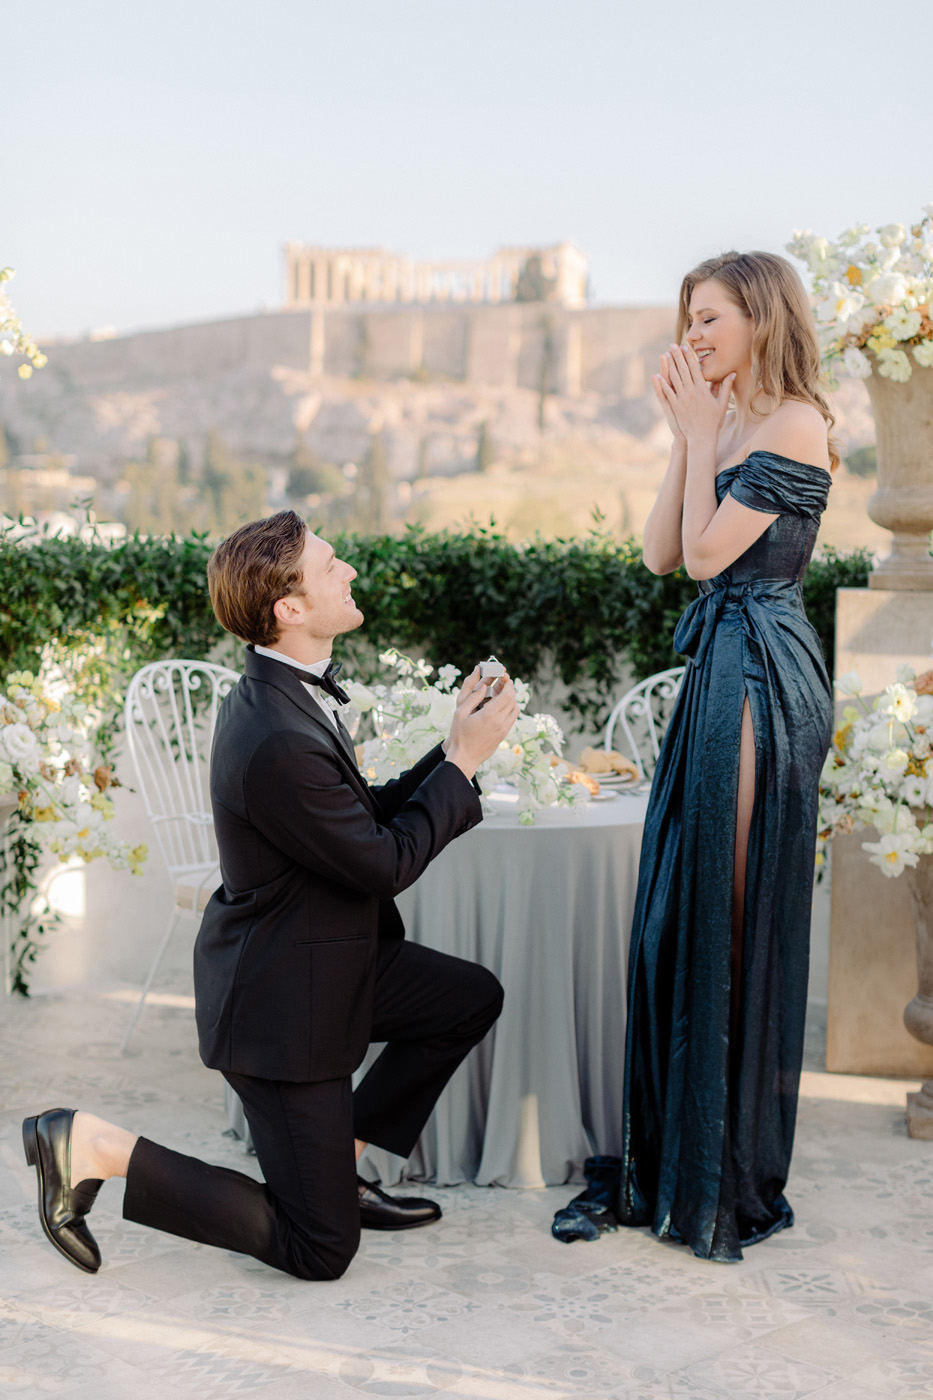 Wedding proposal in Athens when he gives her the ring with Acropolis view